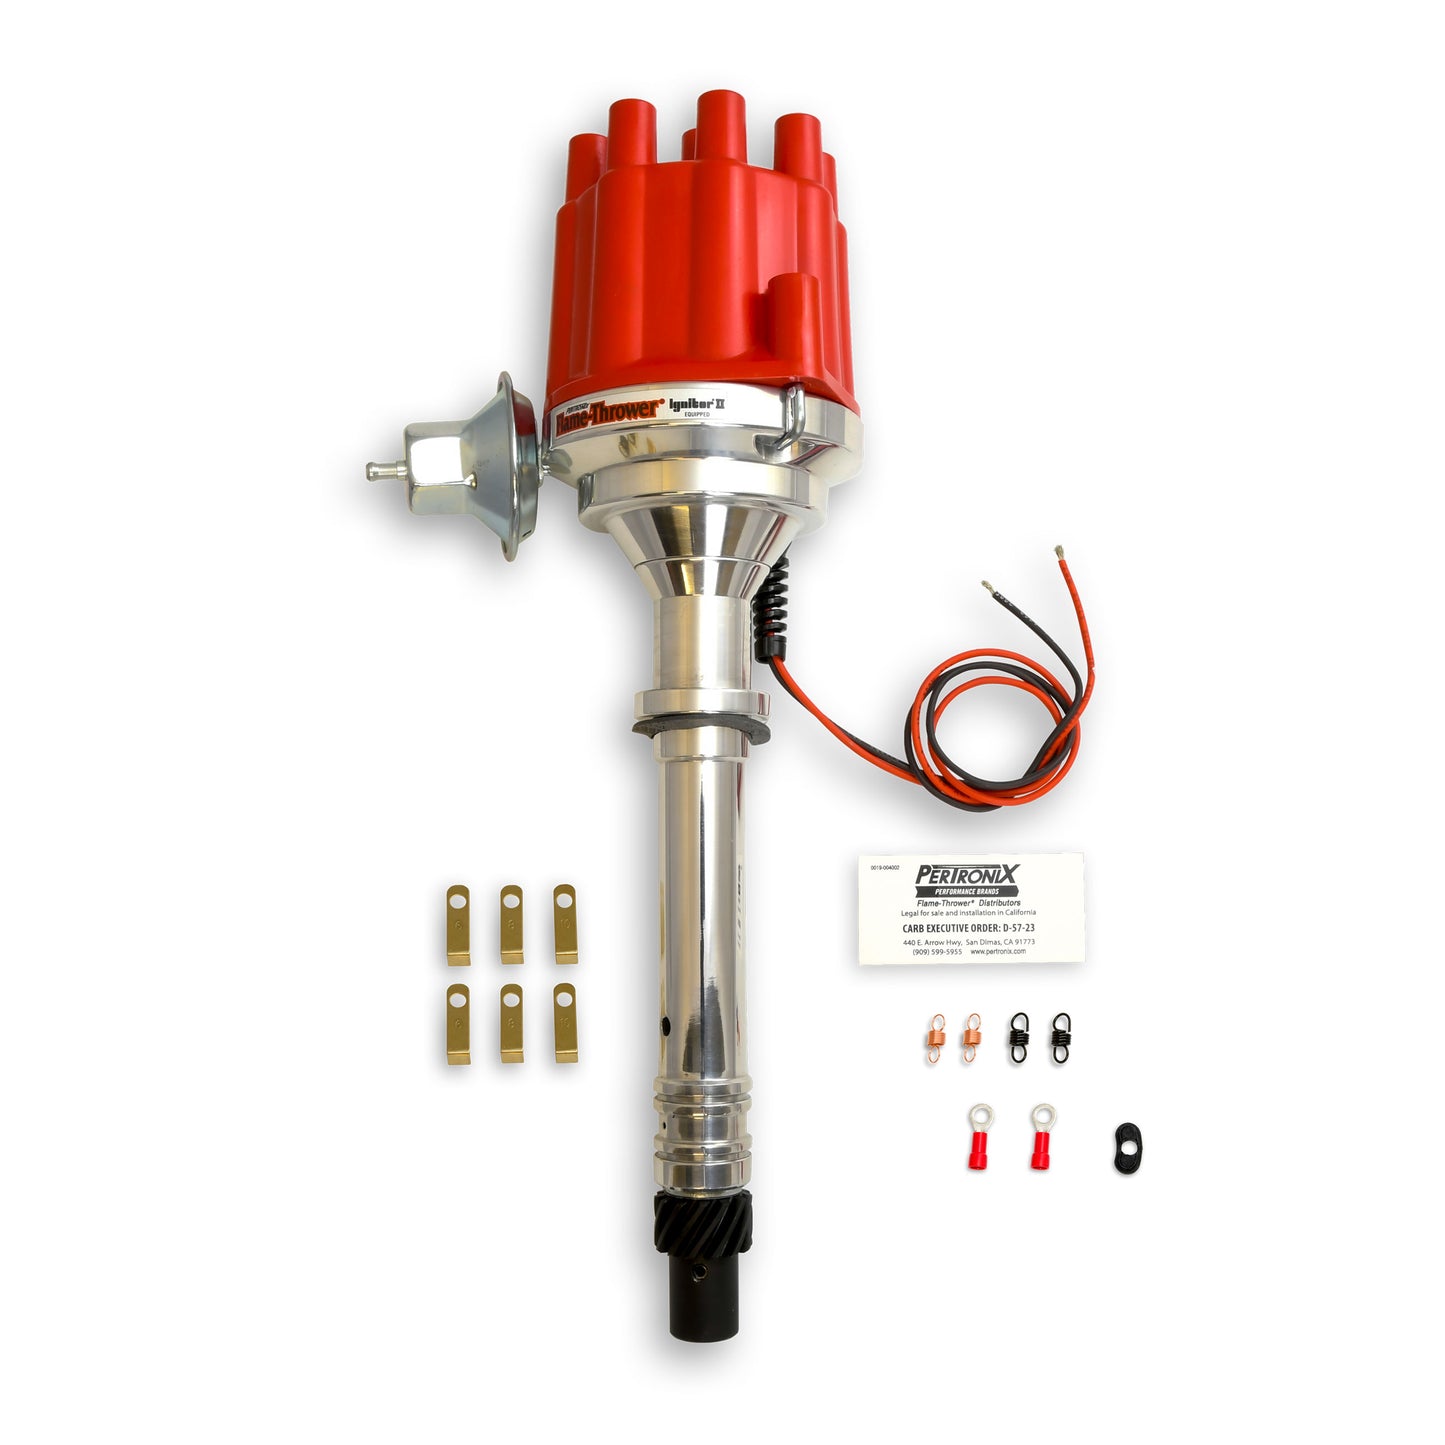 PerTronix D100701 Flame-Thrower Electronic Distributor Billet Chevrolet Small Block/Big Block Plug and Play with Ignitor II Technology Vacuum Advance Red Cap